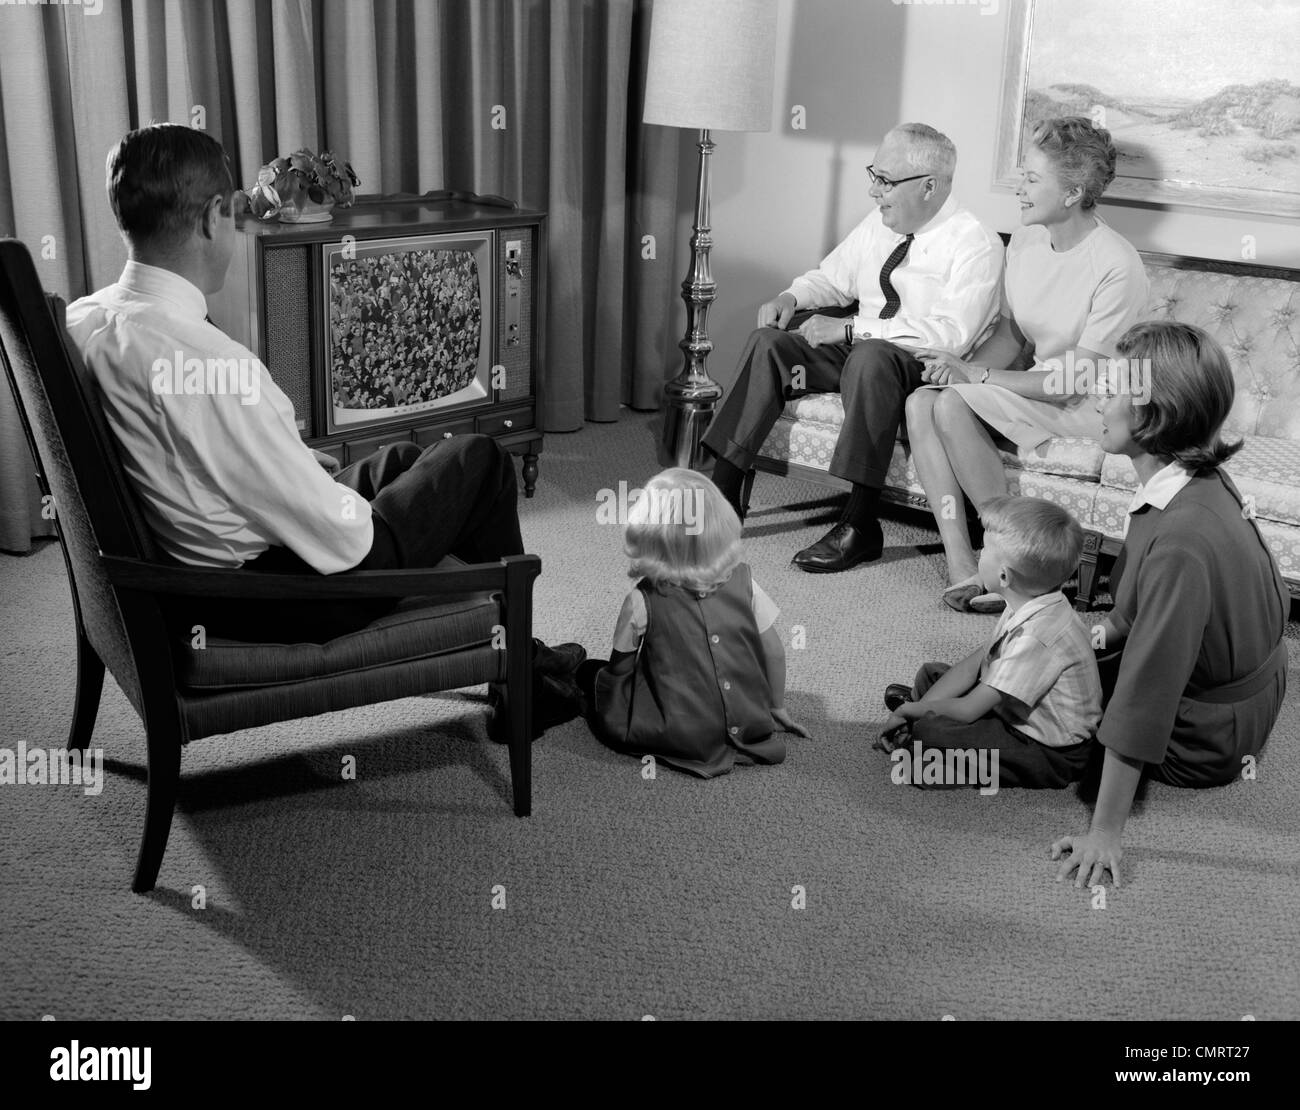 1960 3 FAMILY WATCHING TELEVISION Banque D'Images